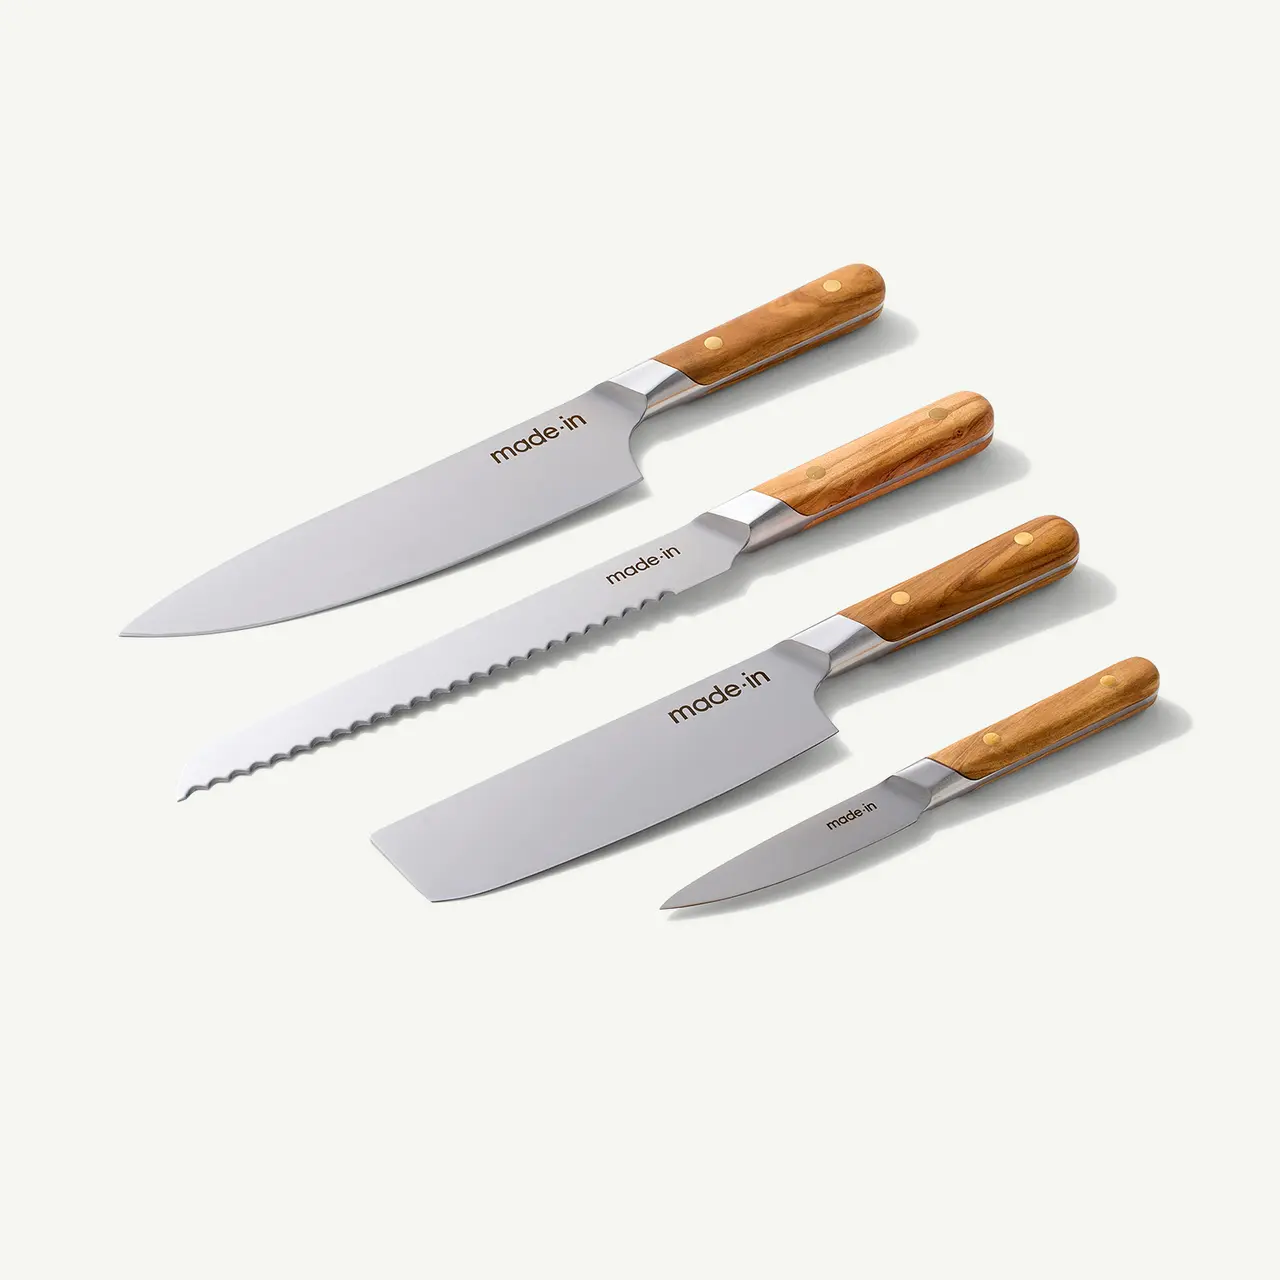 Four different types of kitchen knives with wooden handles are displayed on a light background.